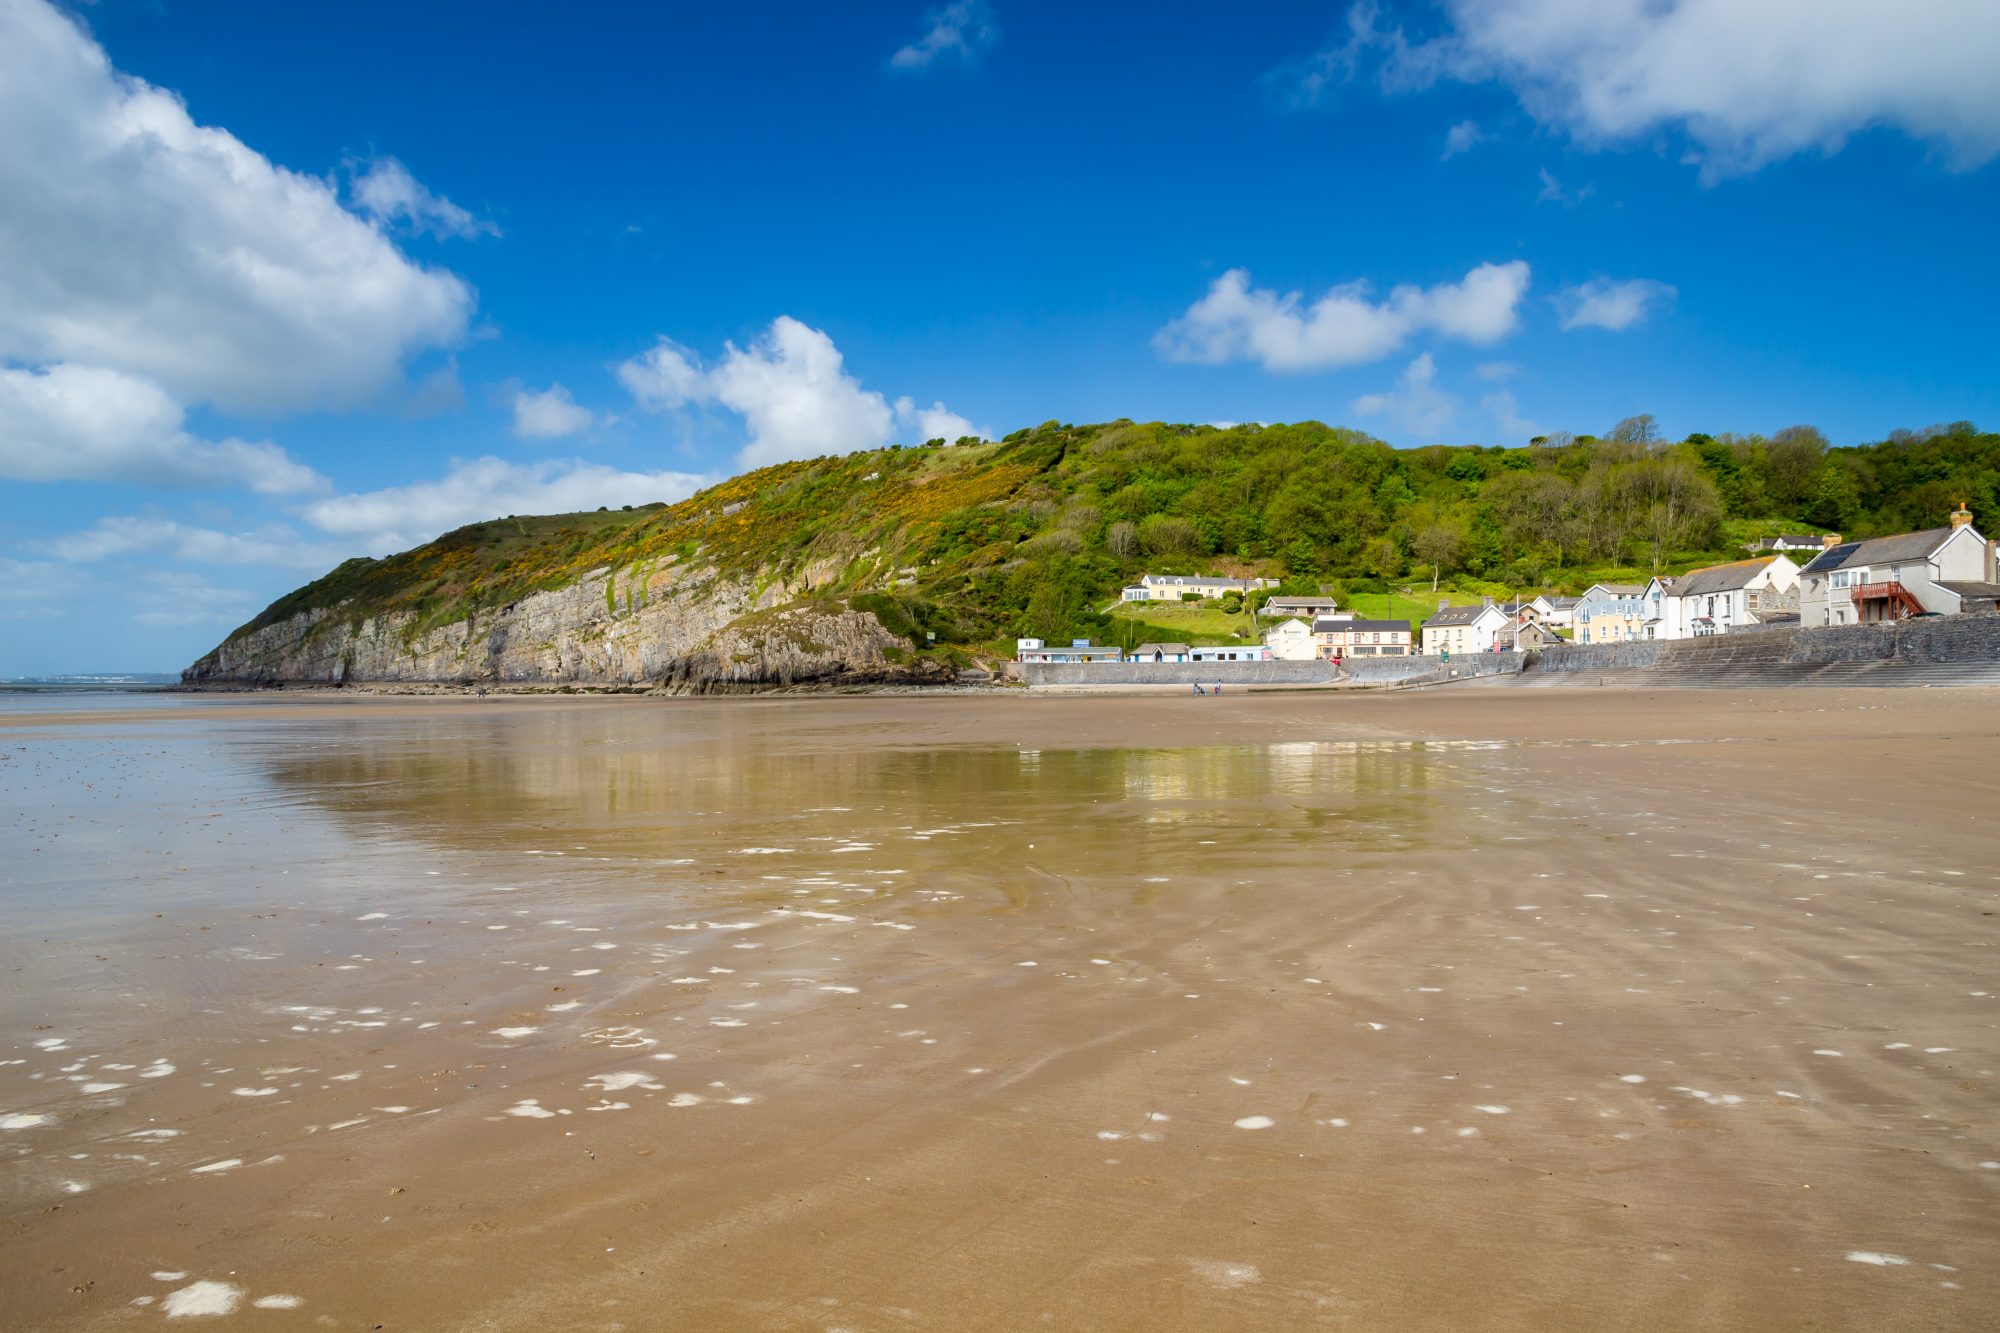 Pendine Sands a 7 mile length of beach on the shores of Carmarthen Bay Wales UK Europe